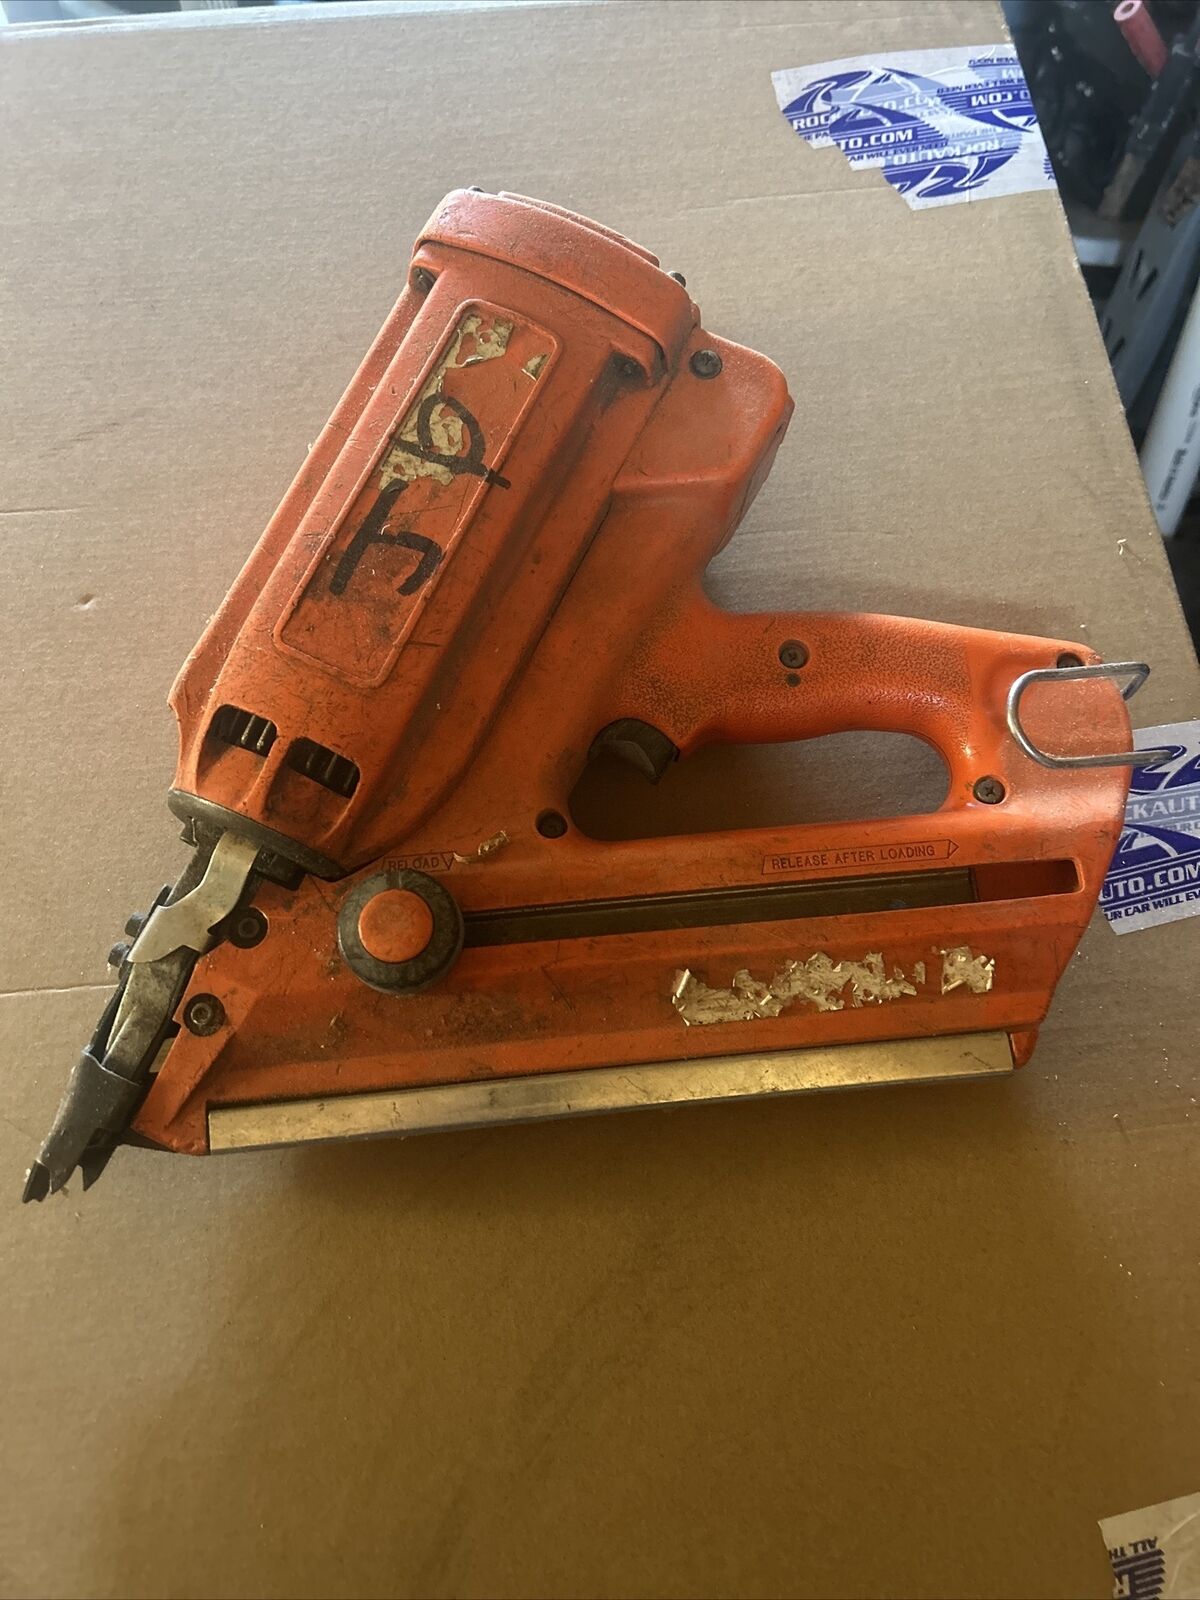 Paslode IMCT 900420/30 Degree Impulse Framing Nailer - Tool Only UNTESTED